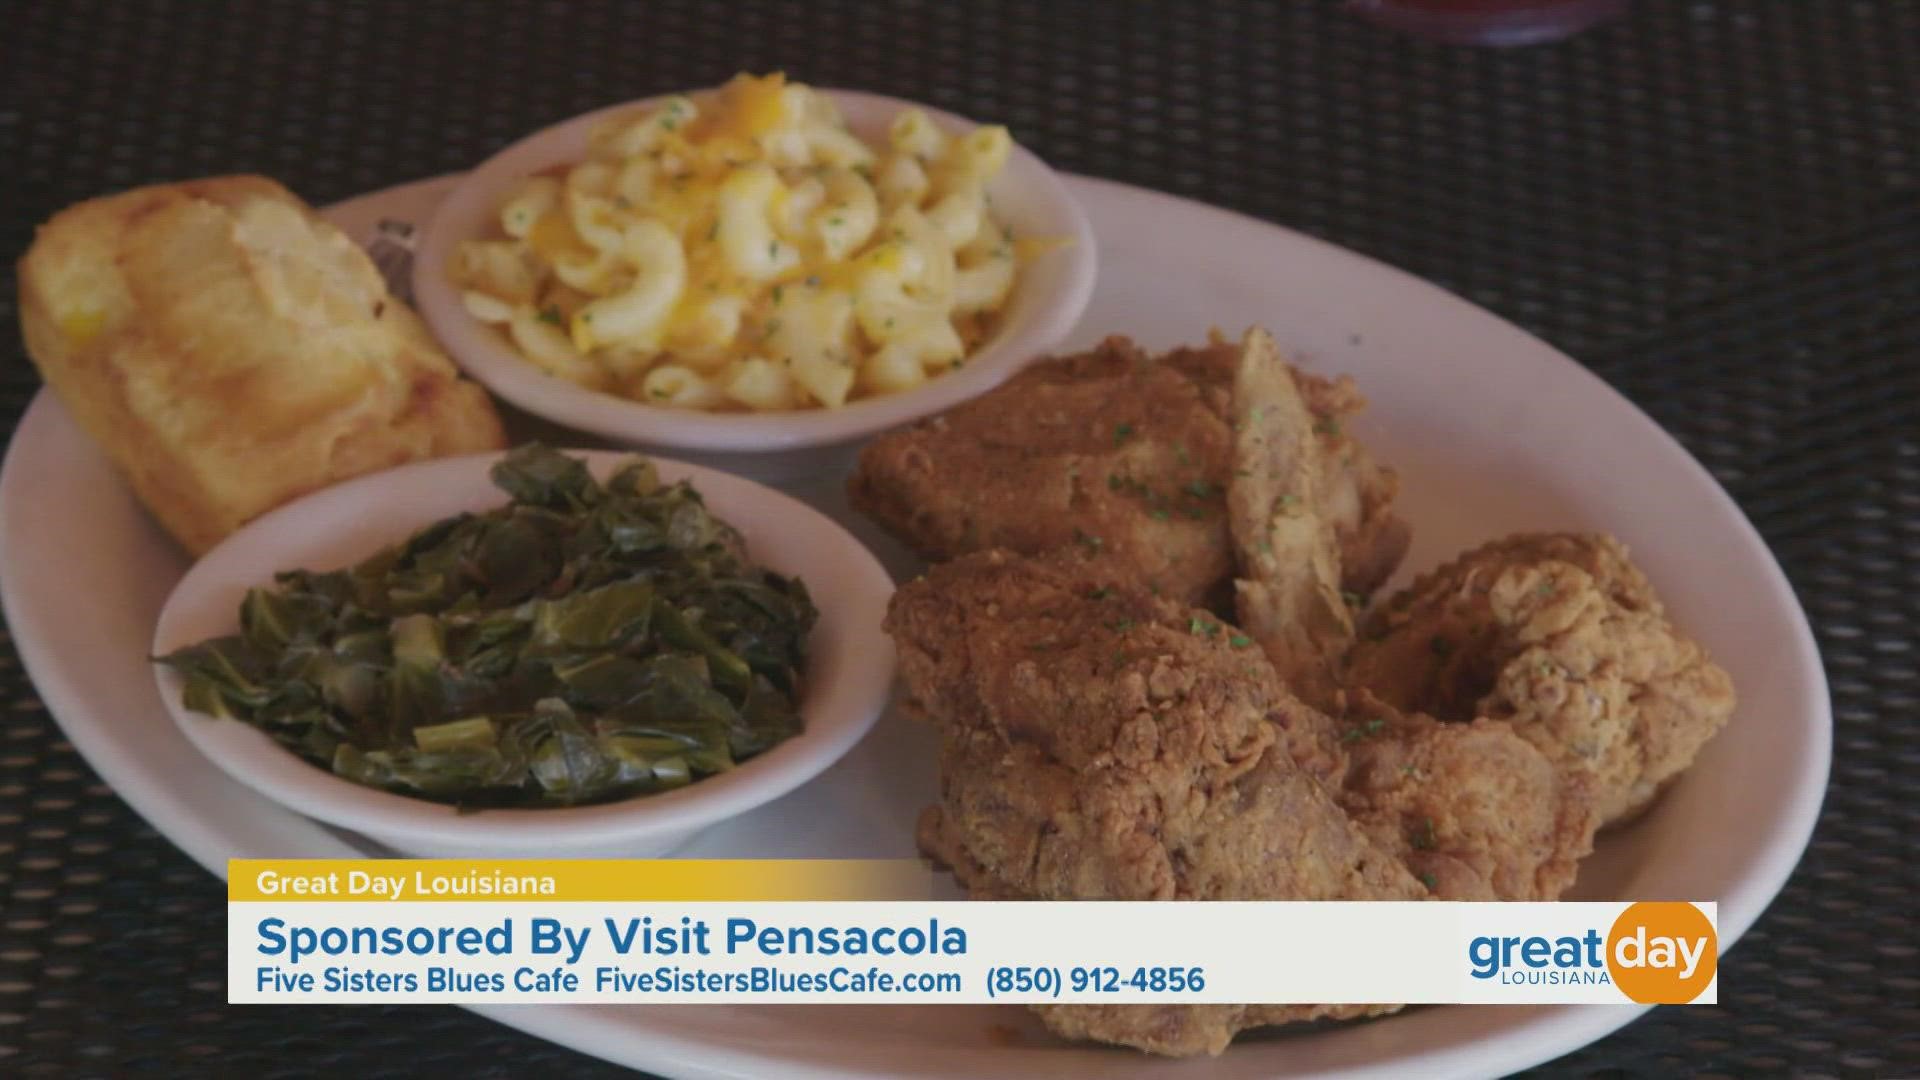 We explore the delicious food and local music that is available when you visit Pensacola.